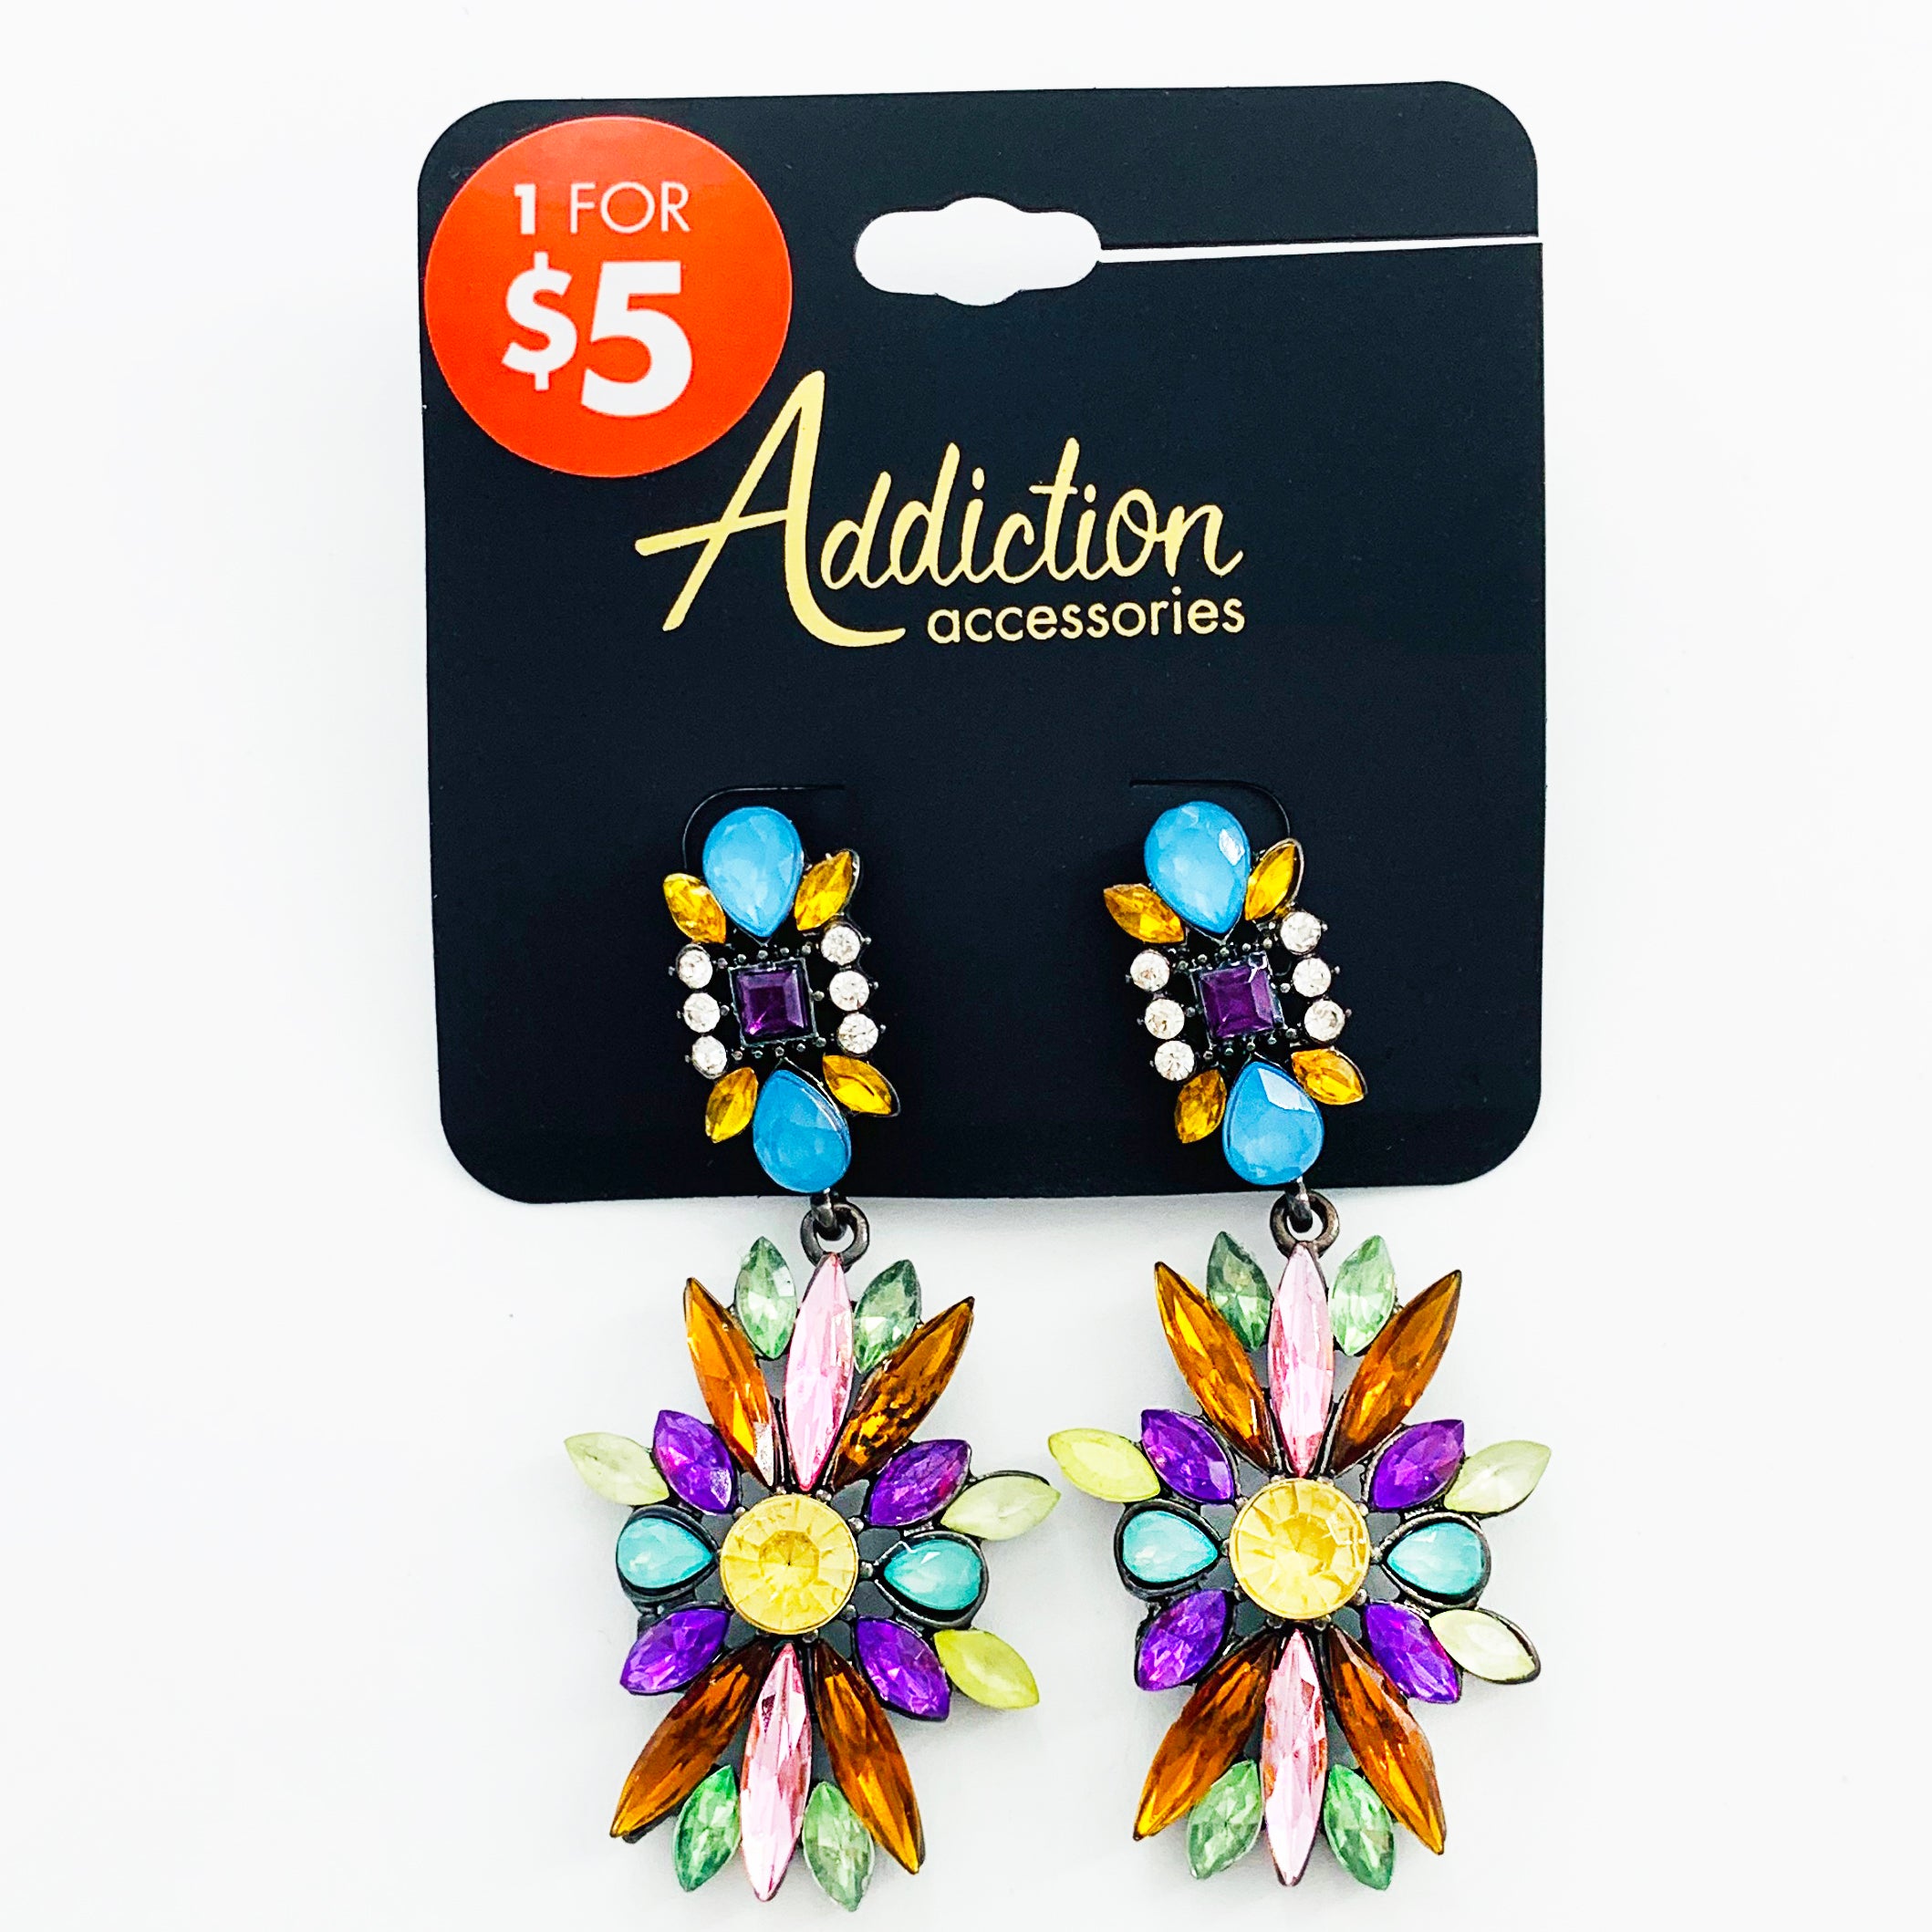 Art-deco inspired starburst earrings with colourful stones